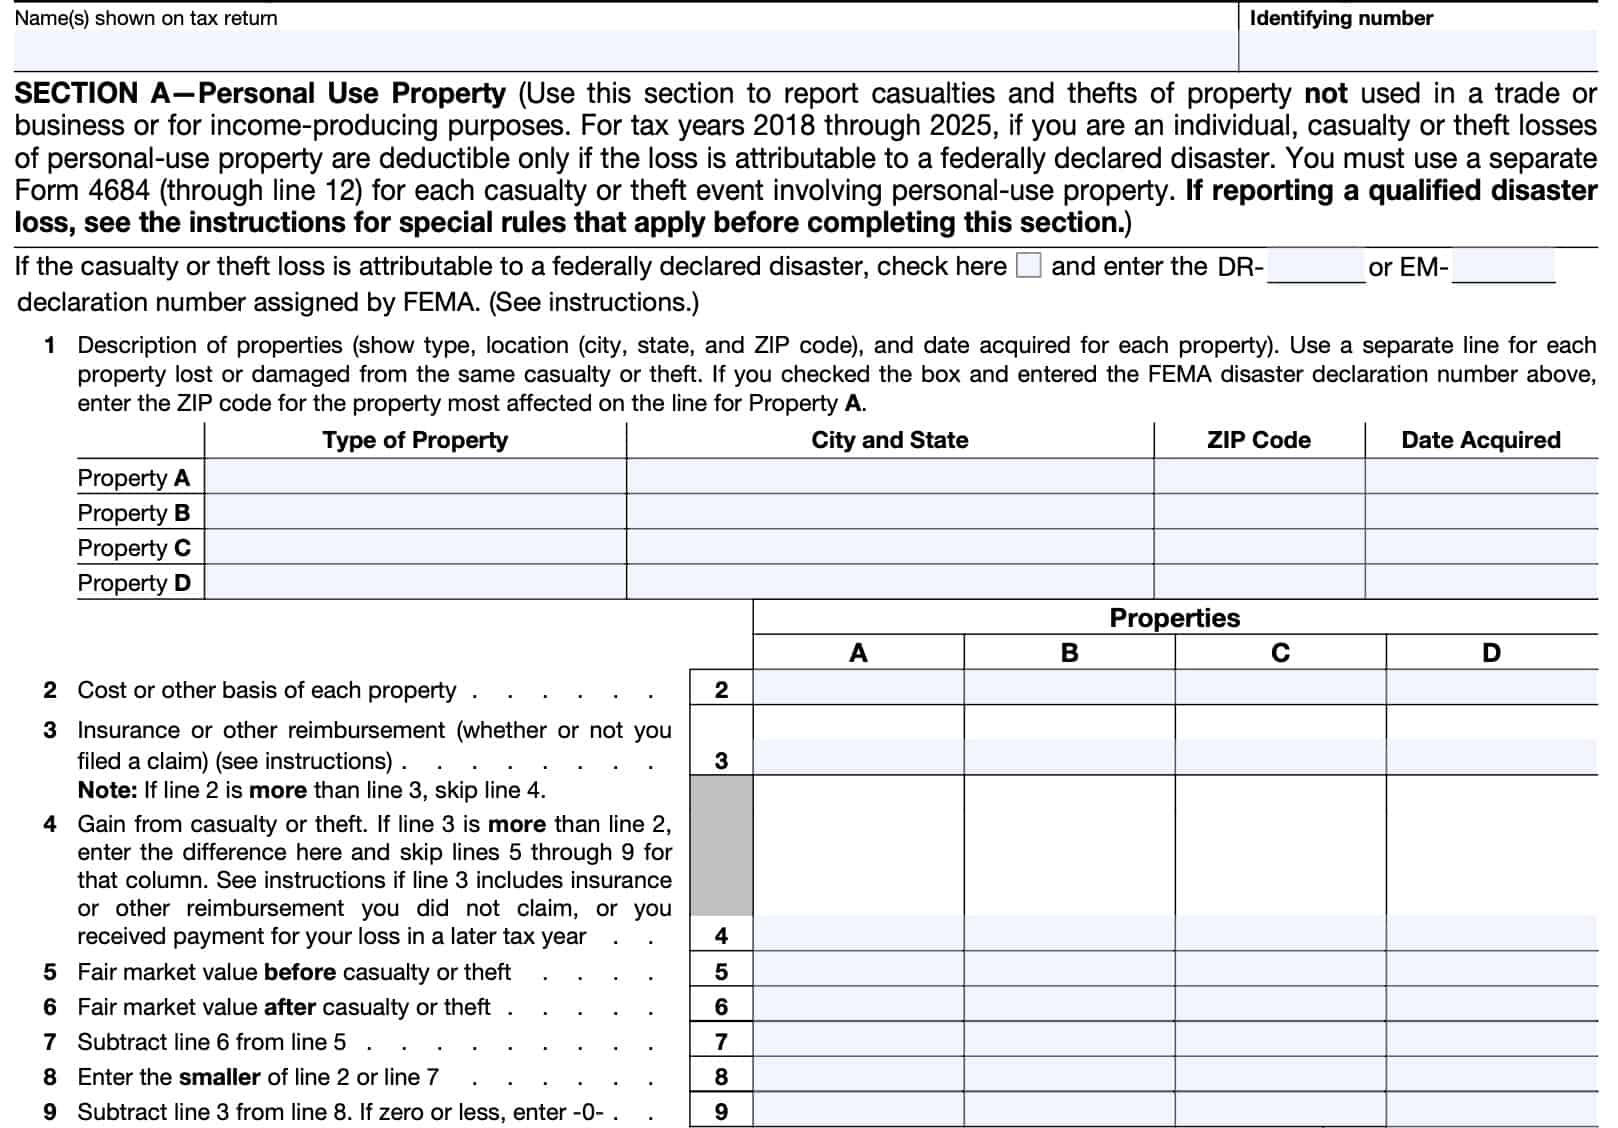 irs form 4684, casualty and thefts, section a-personal use property